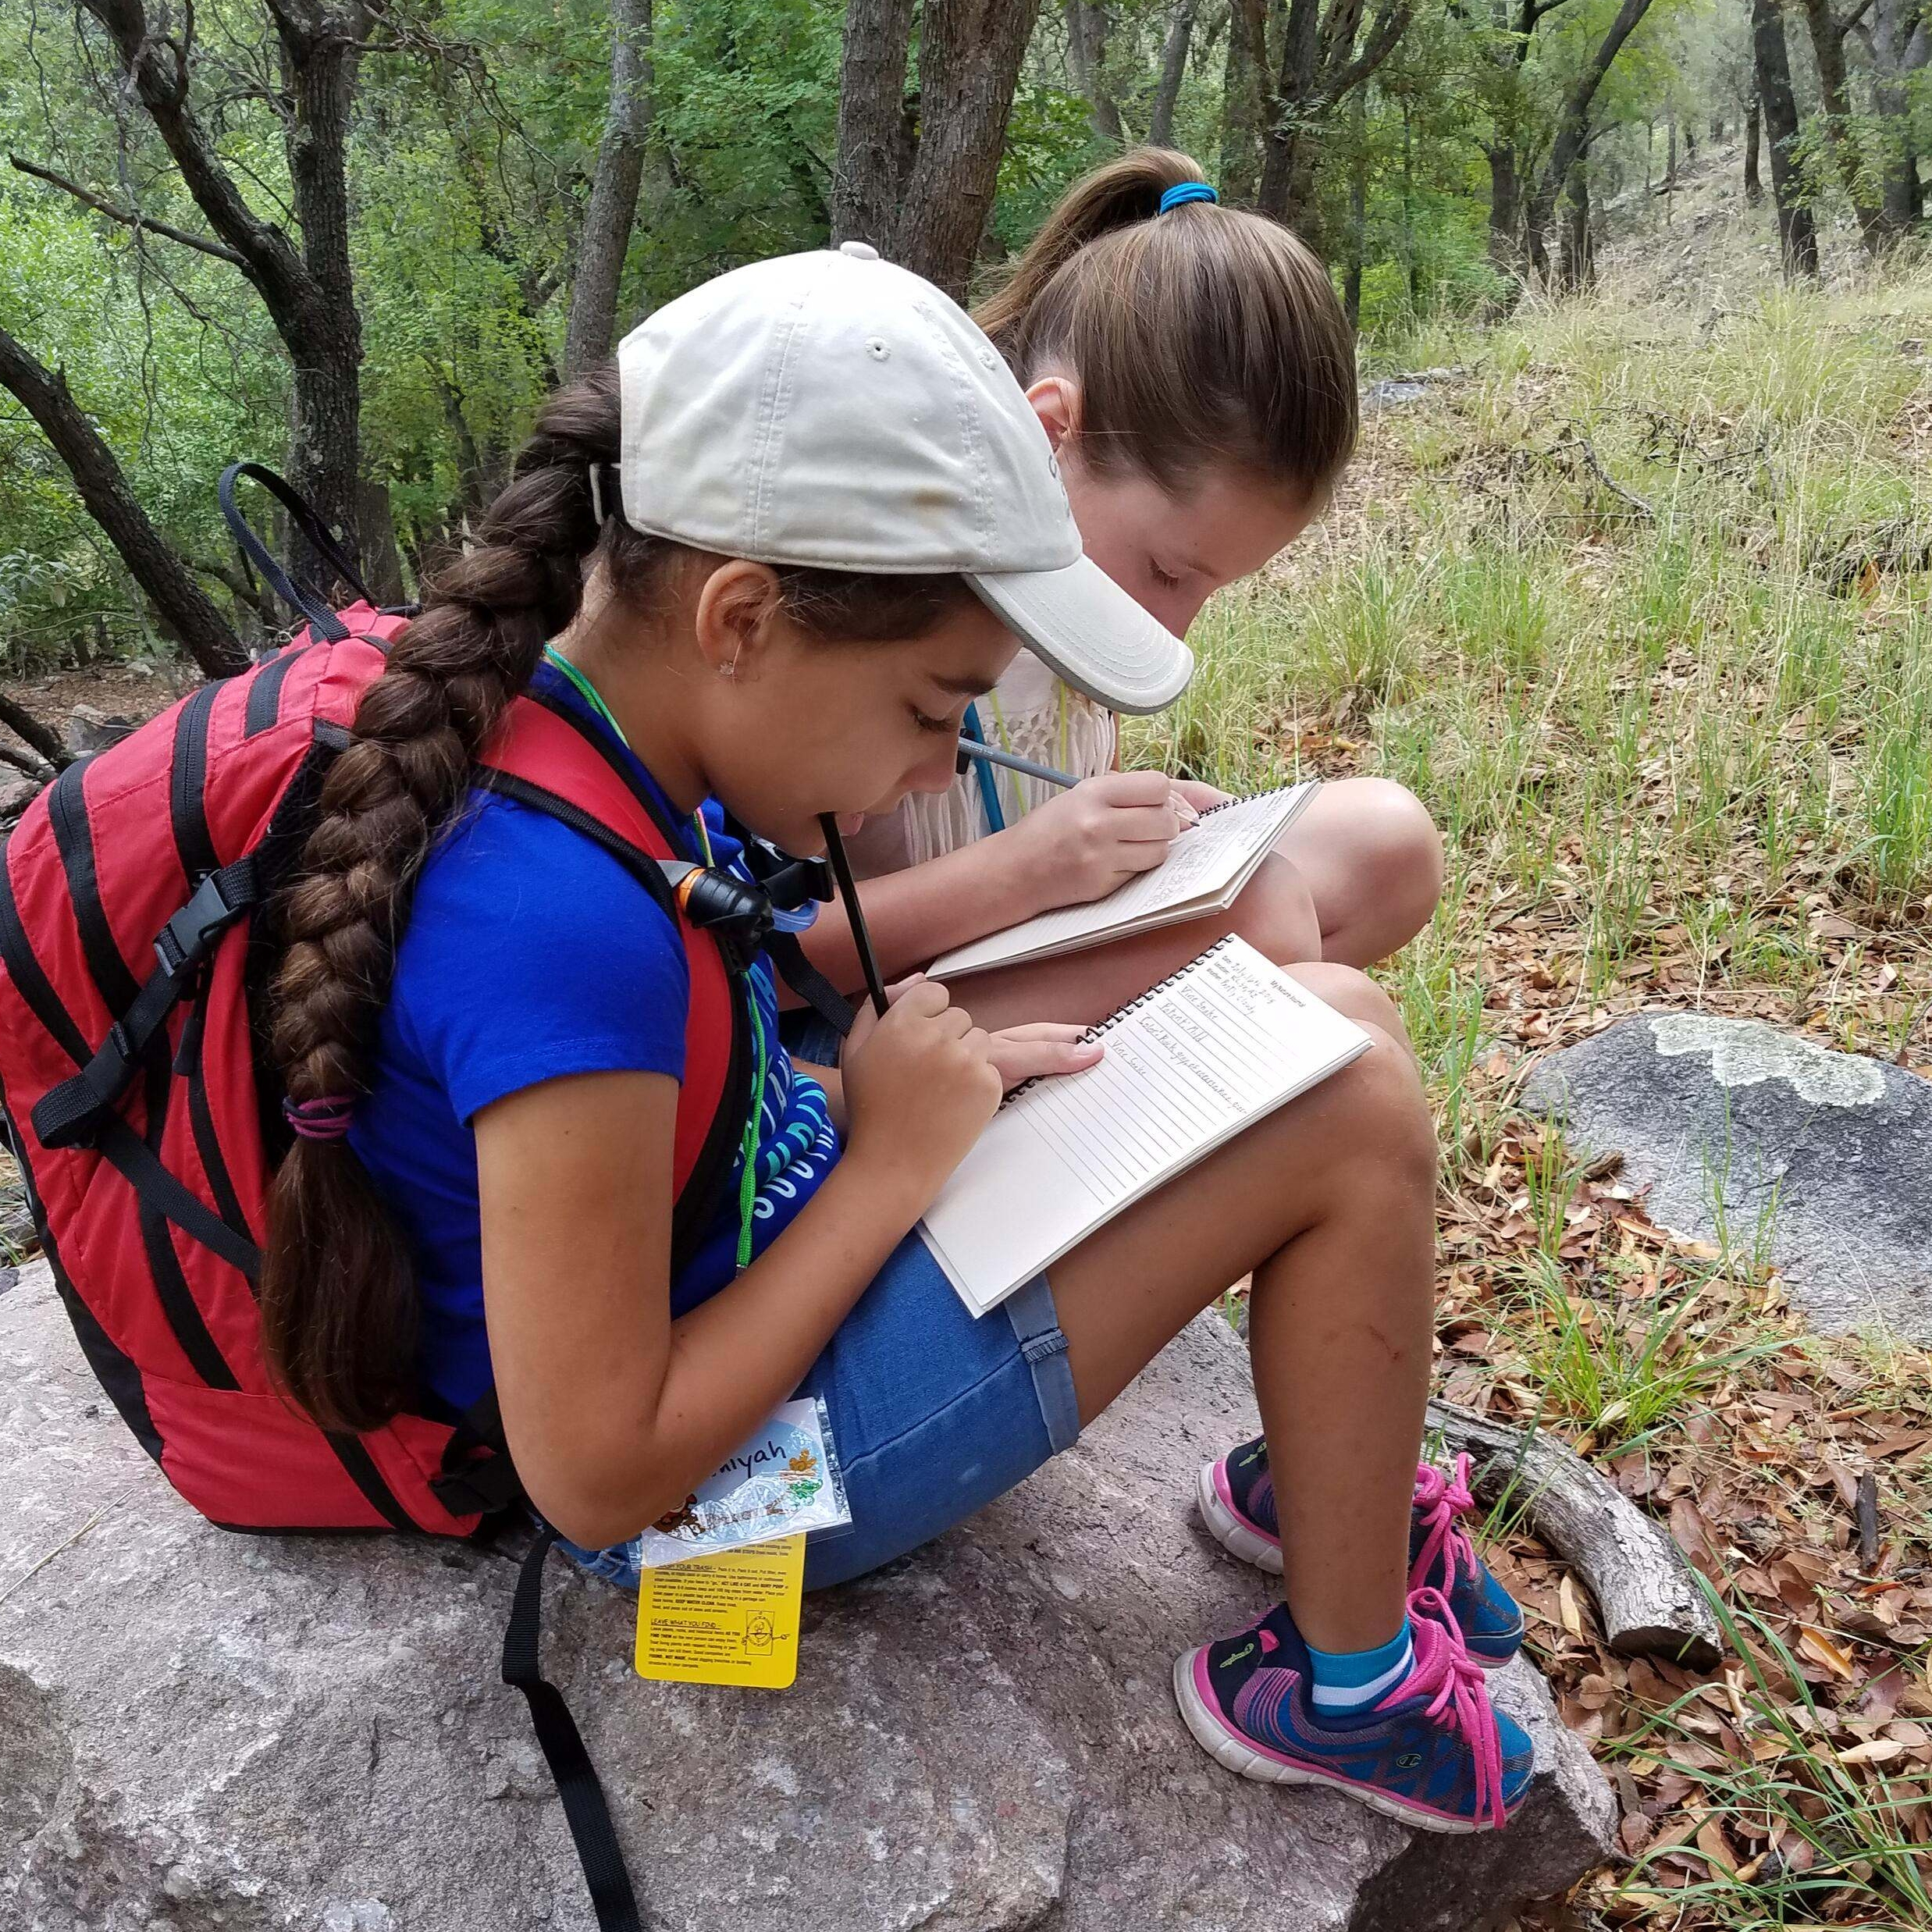 Two children, one wearing a backpack, sit on a rock and write in notebooks.